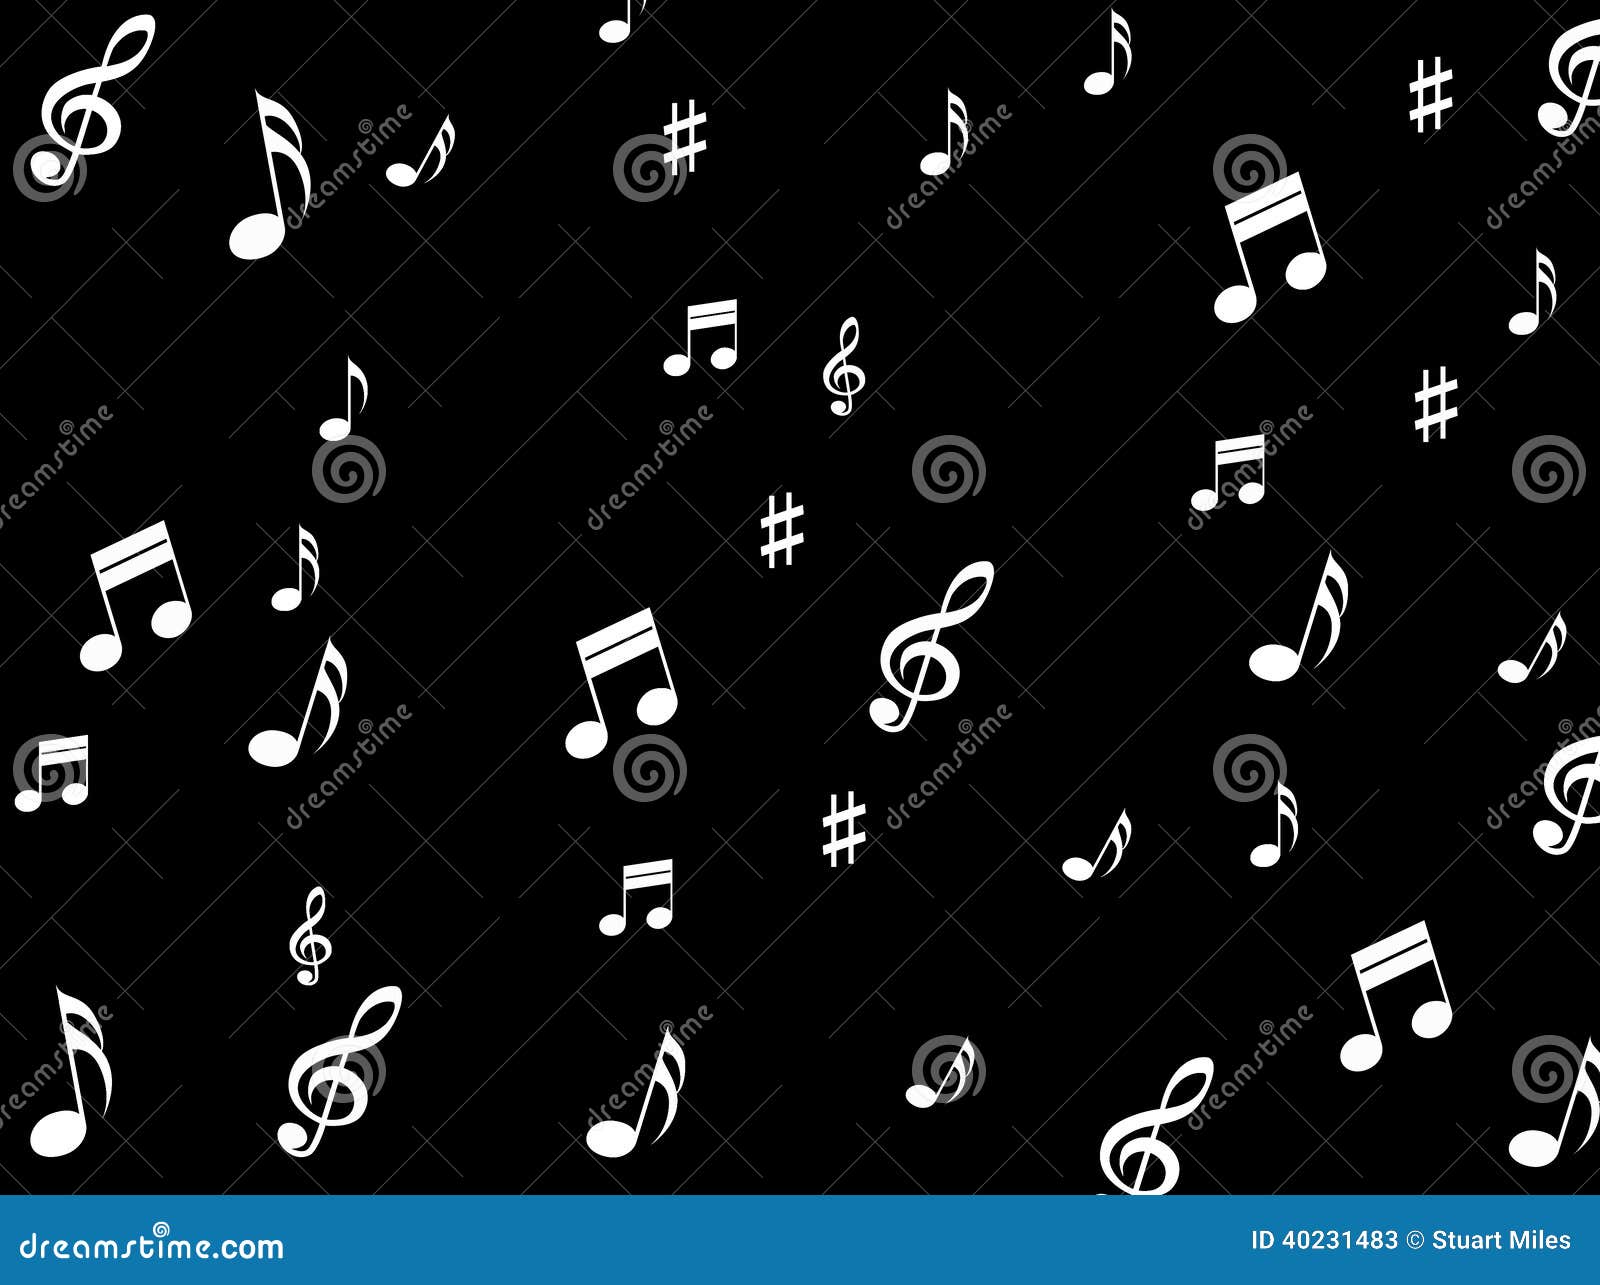 musical notes background means melodies